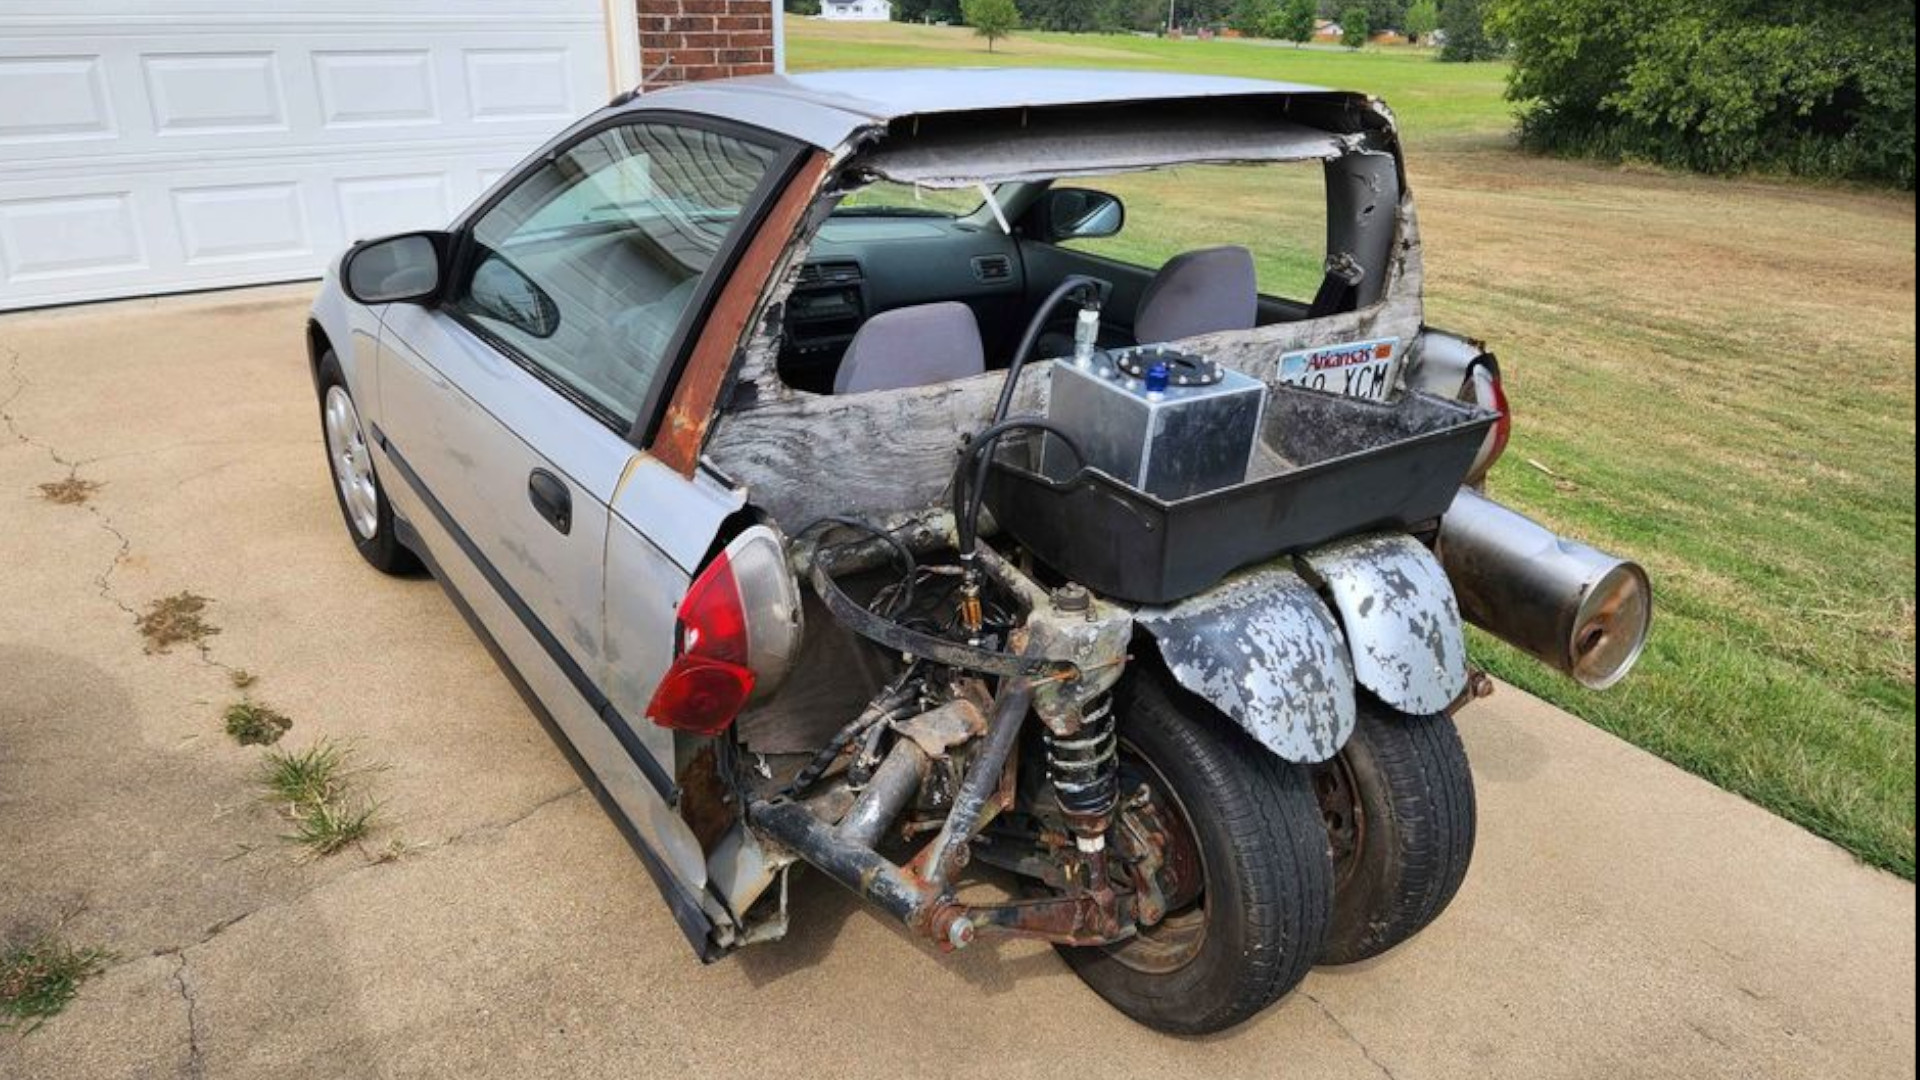 Someone’s Selling a Messed up Civic in the Wrong Nashville, Y’all